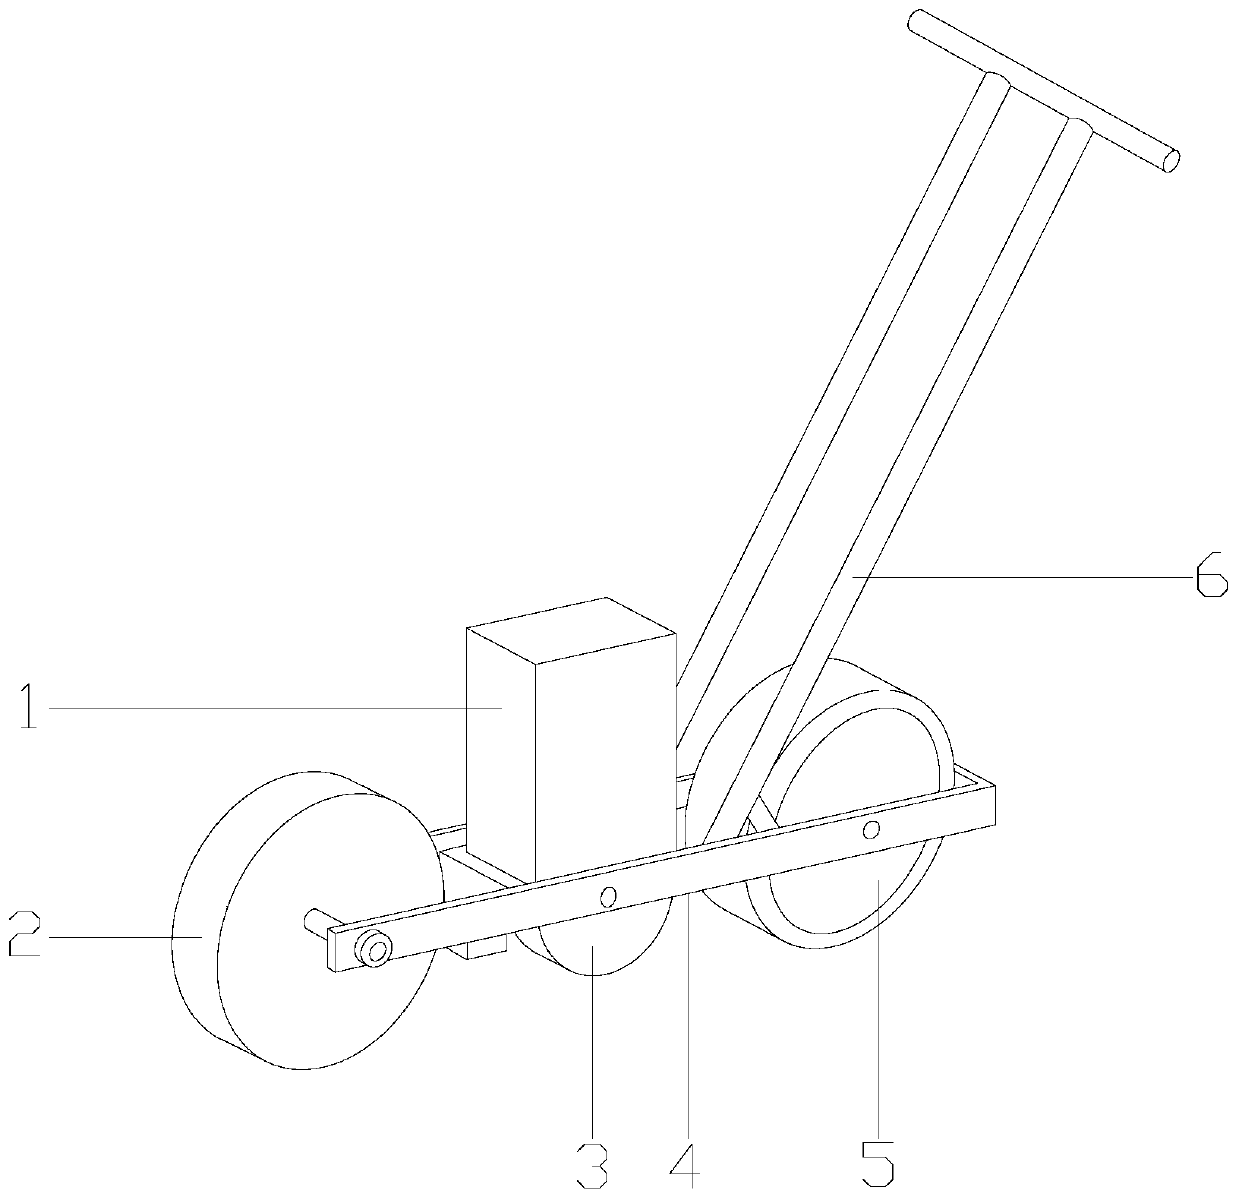 Agricultural spreader for rice planting